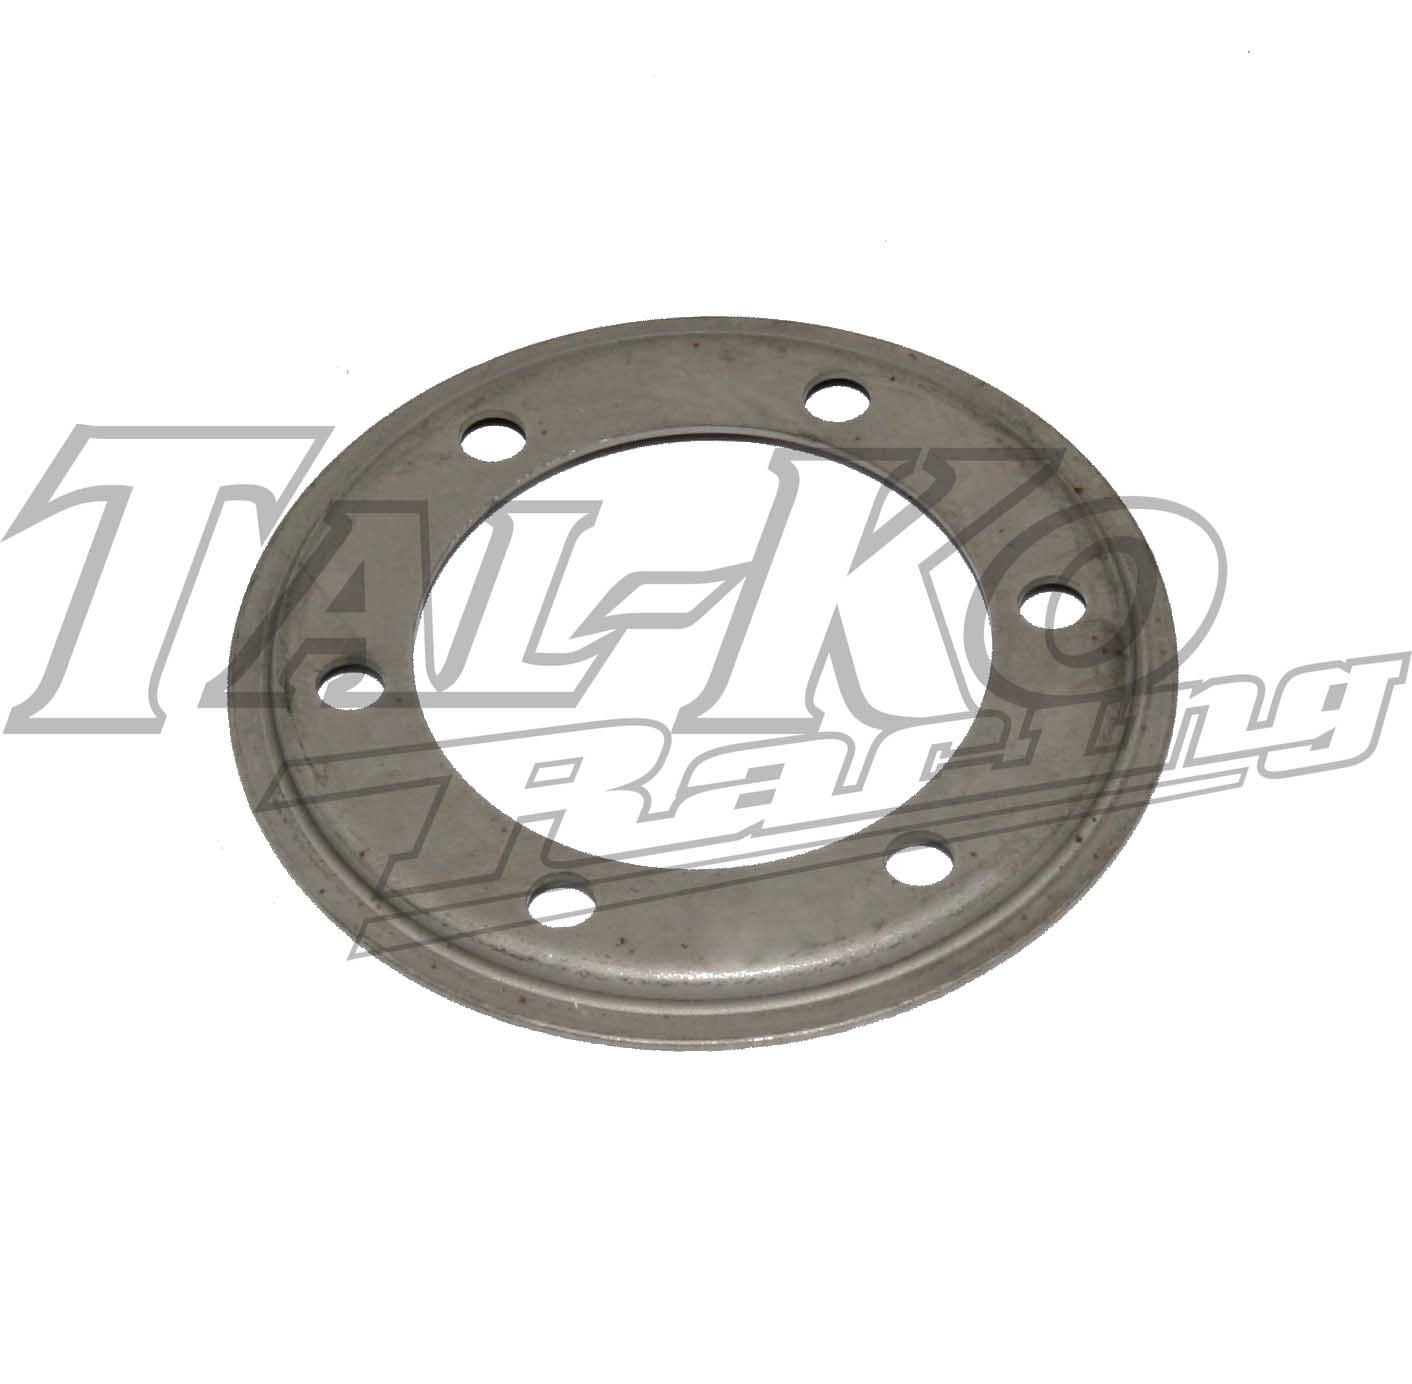 TKM K4S CLUTCH DISHED RETAINING PLATE